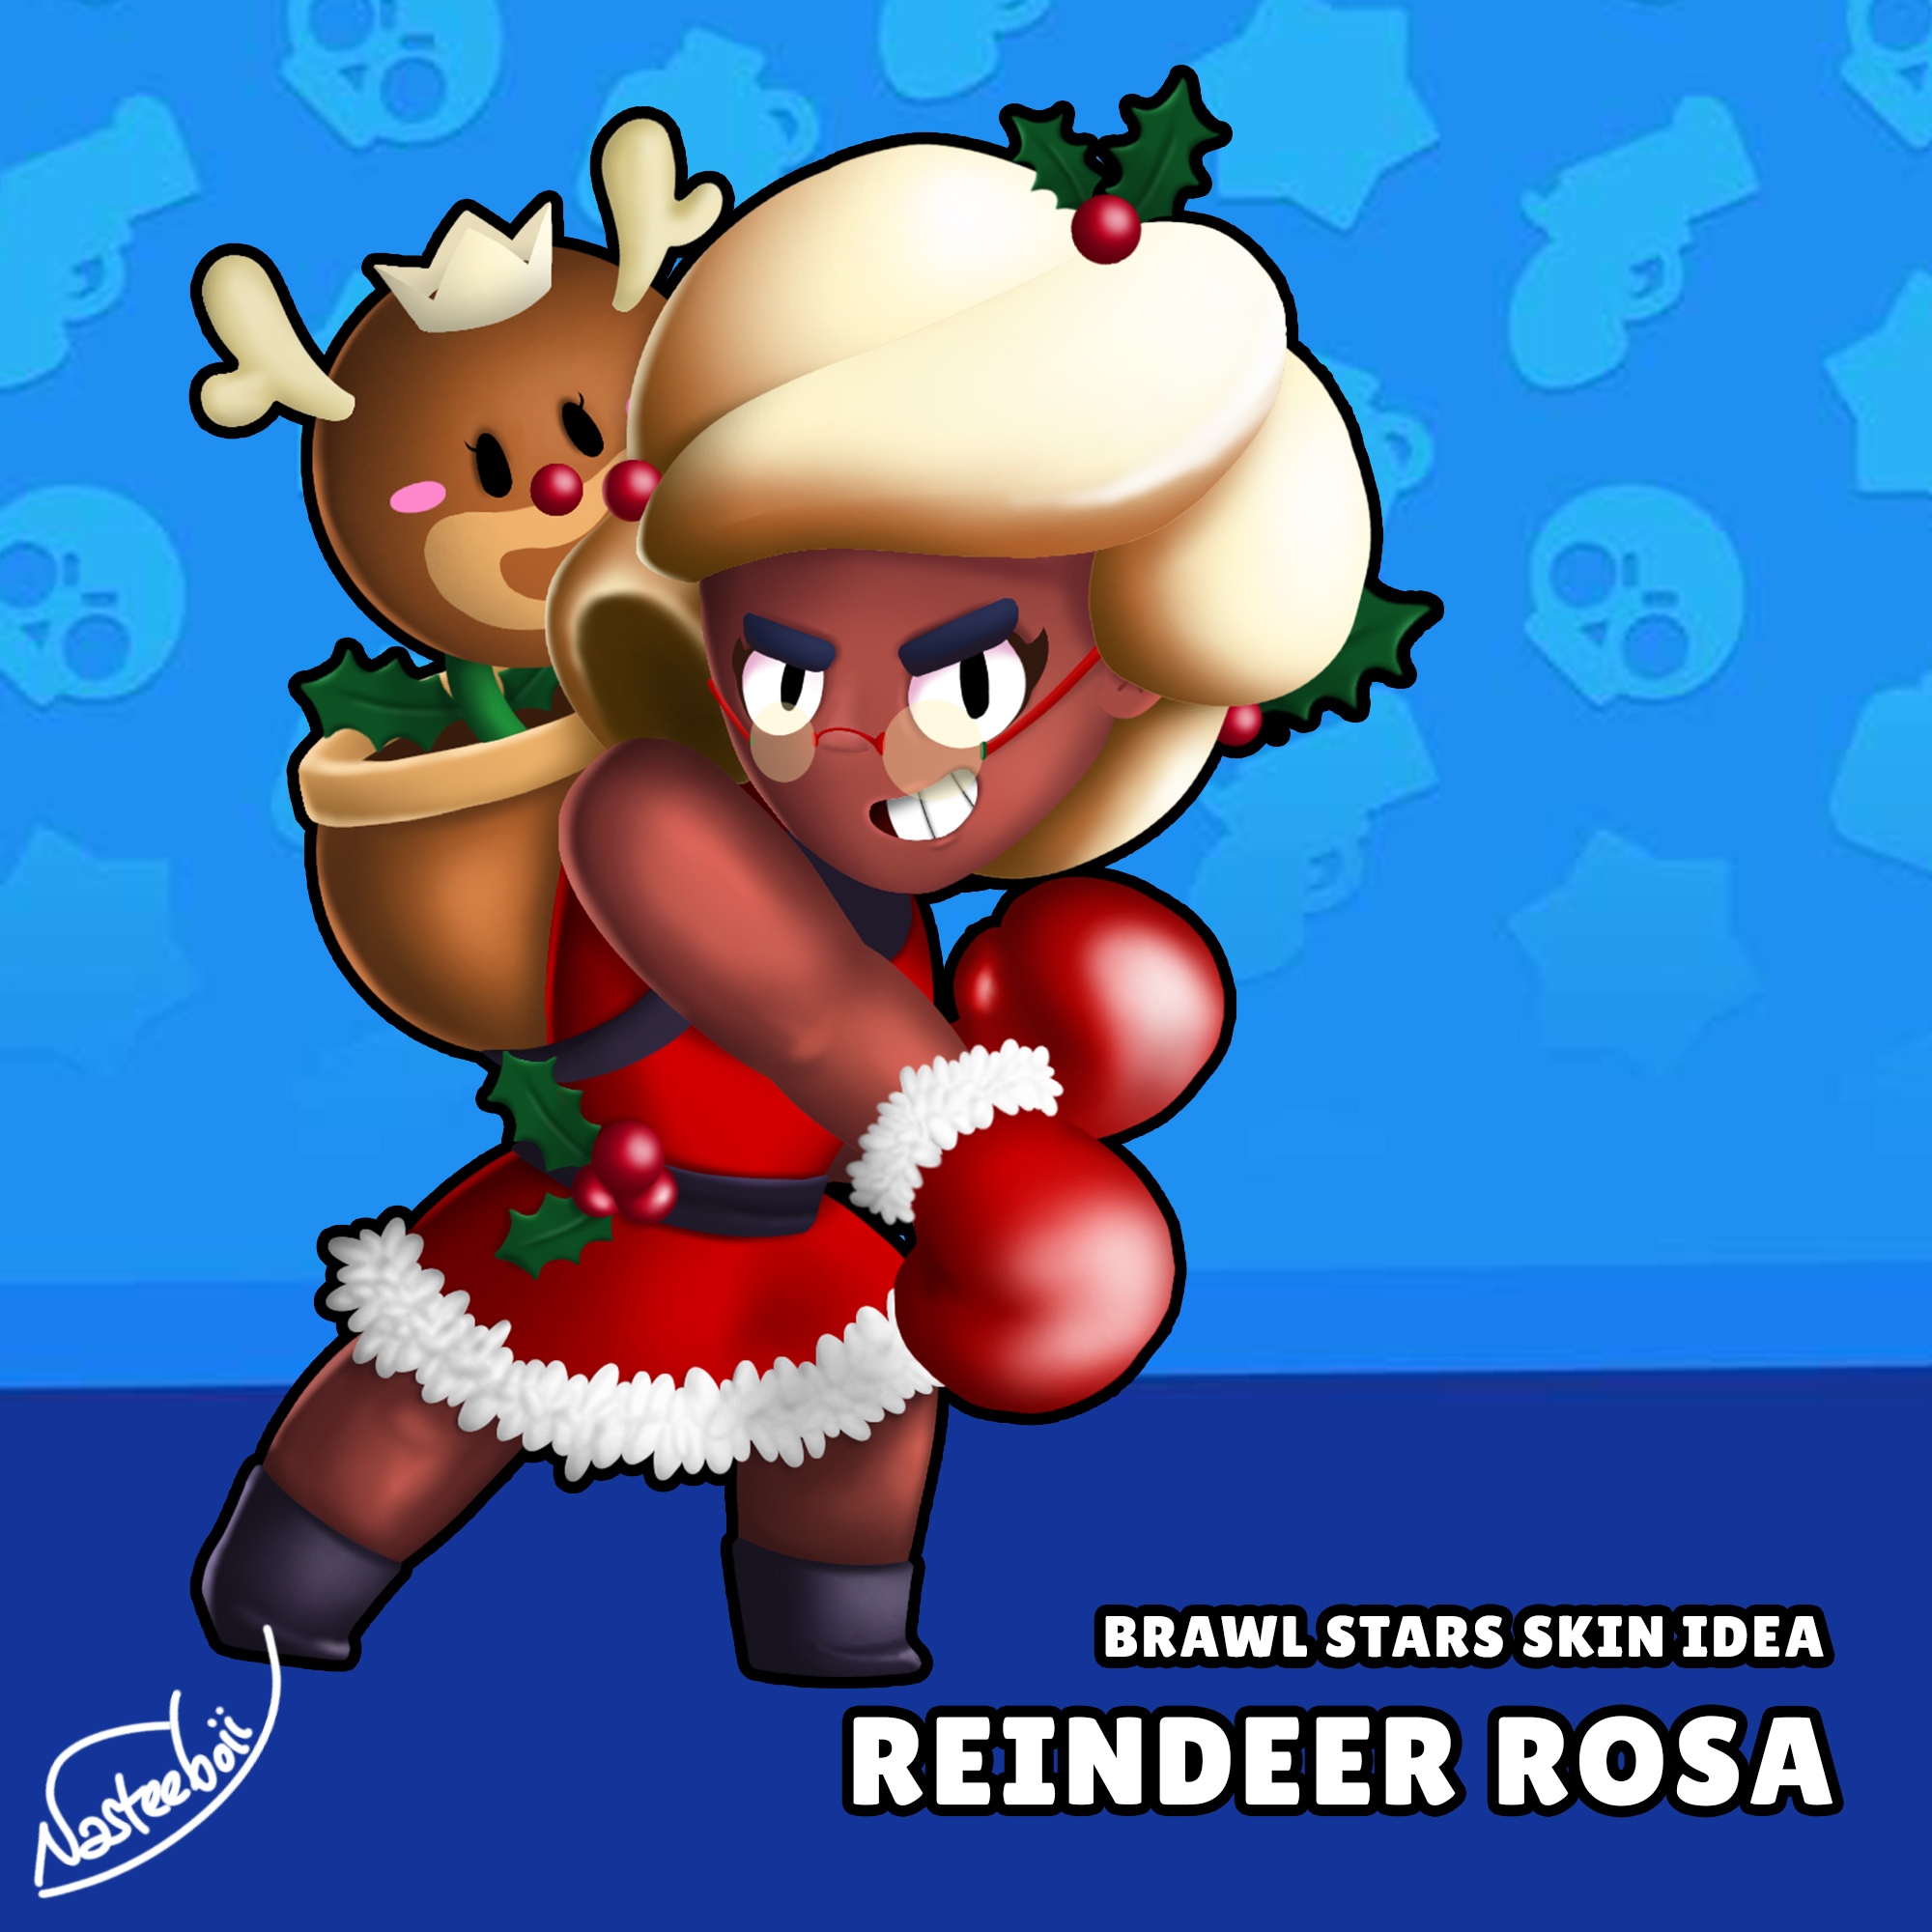 Which Rosa Skin Idea Is You Re Favorite Credit To The Awesome Makers Of These Skns Fandom